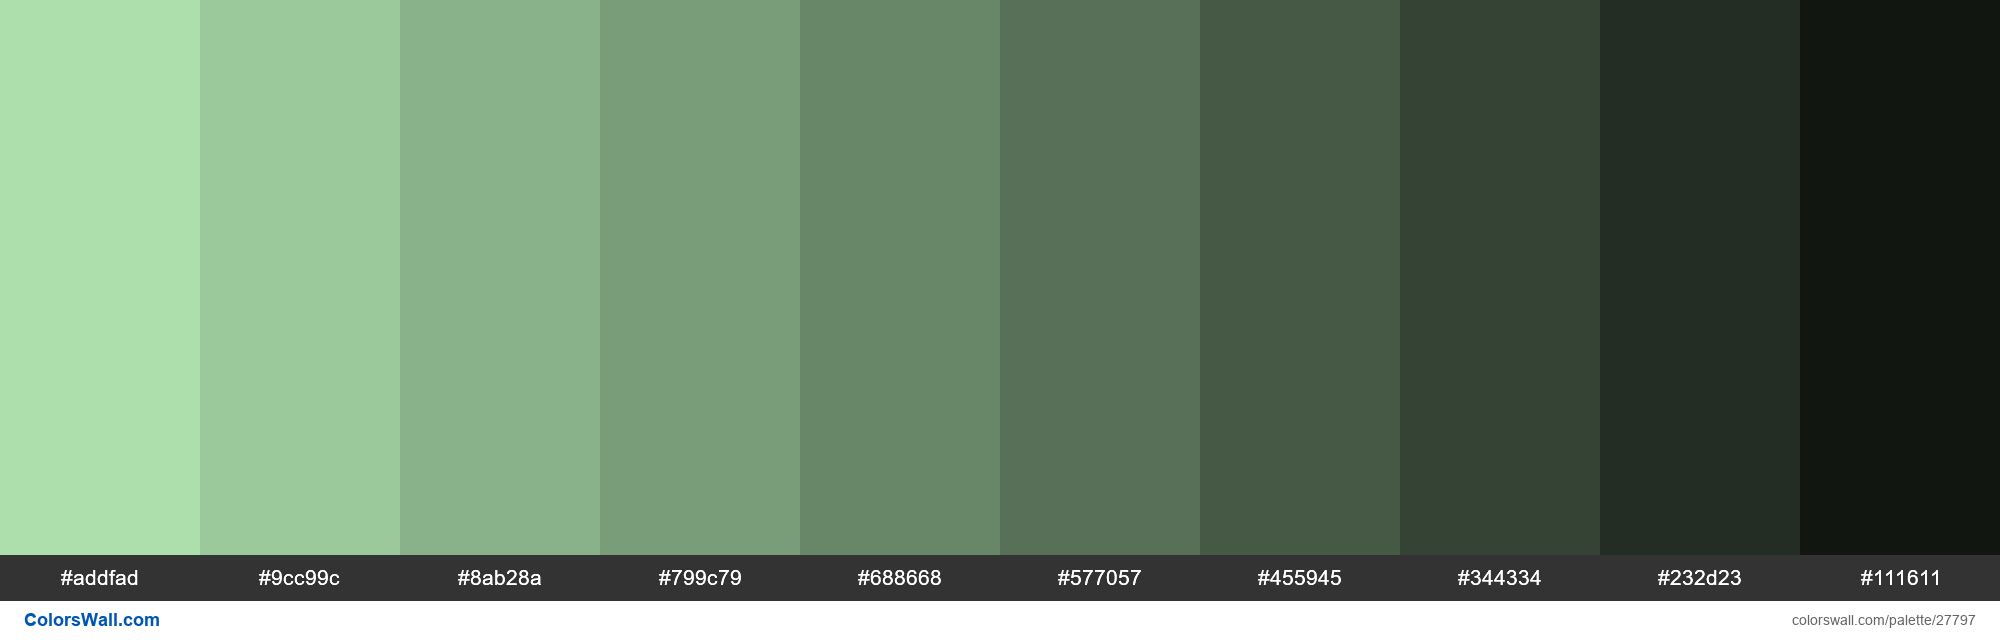 Moss green / #8a9a5b Hex Color Code, RGB and Paints